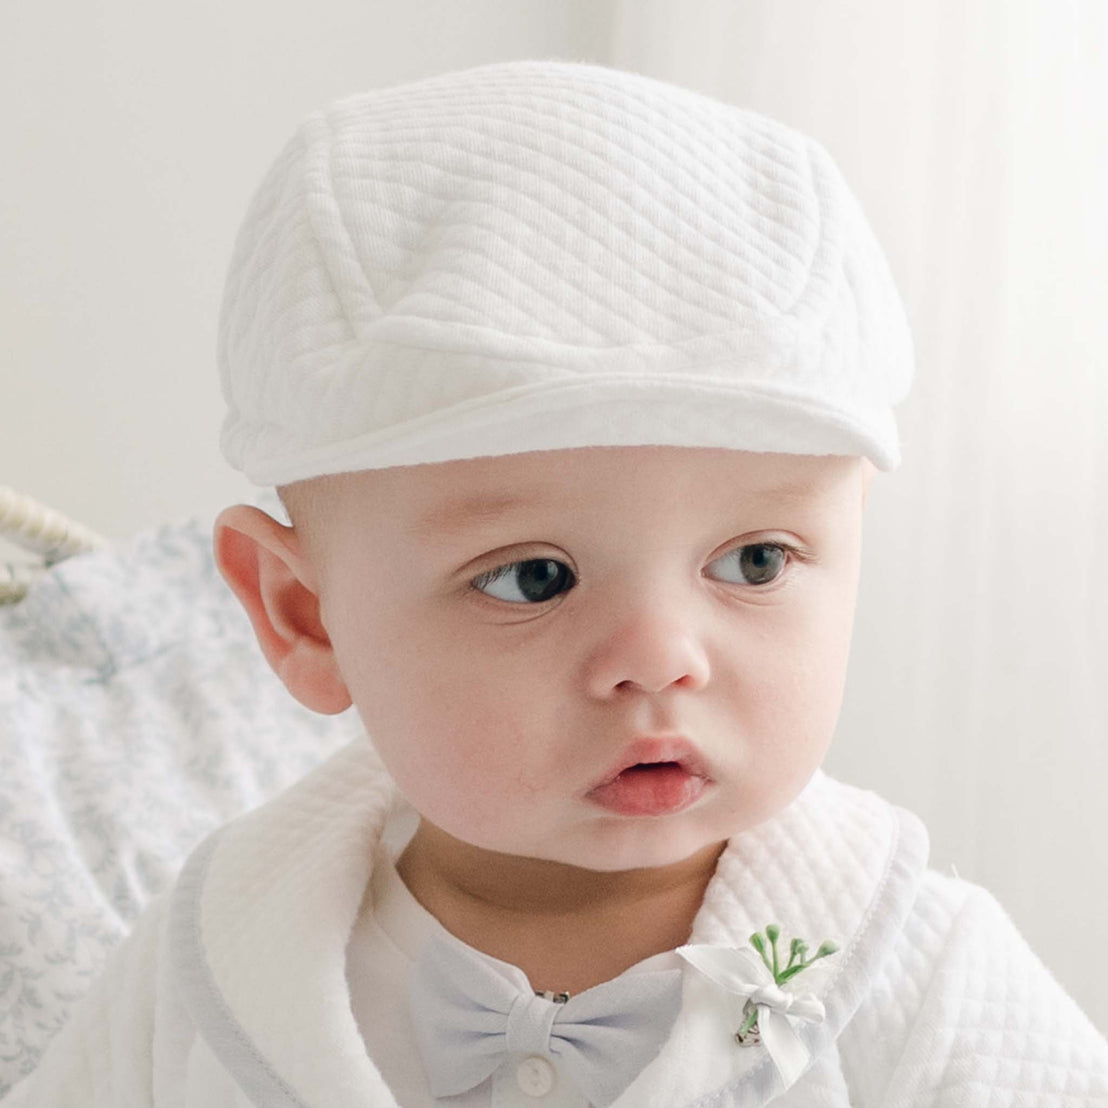 A baby donning the Harrison Newsboy Cap in quilted cotton, along with a matching white outfit and bow tie, is gazing slightly to the side. The softly blurred background enhances the calm and serene atmosphere.